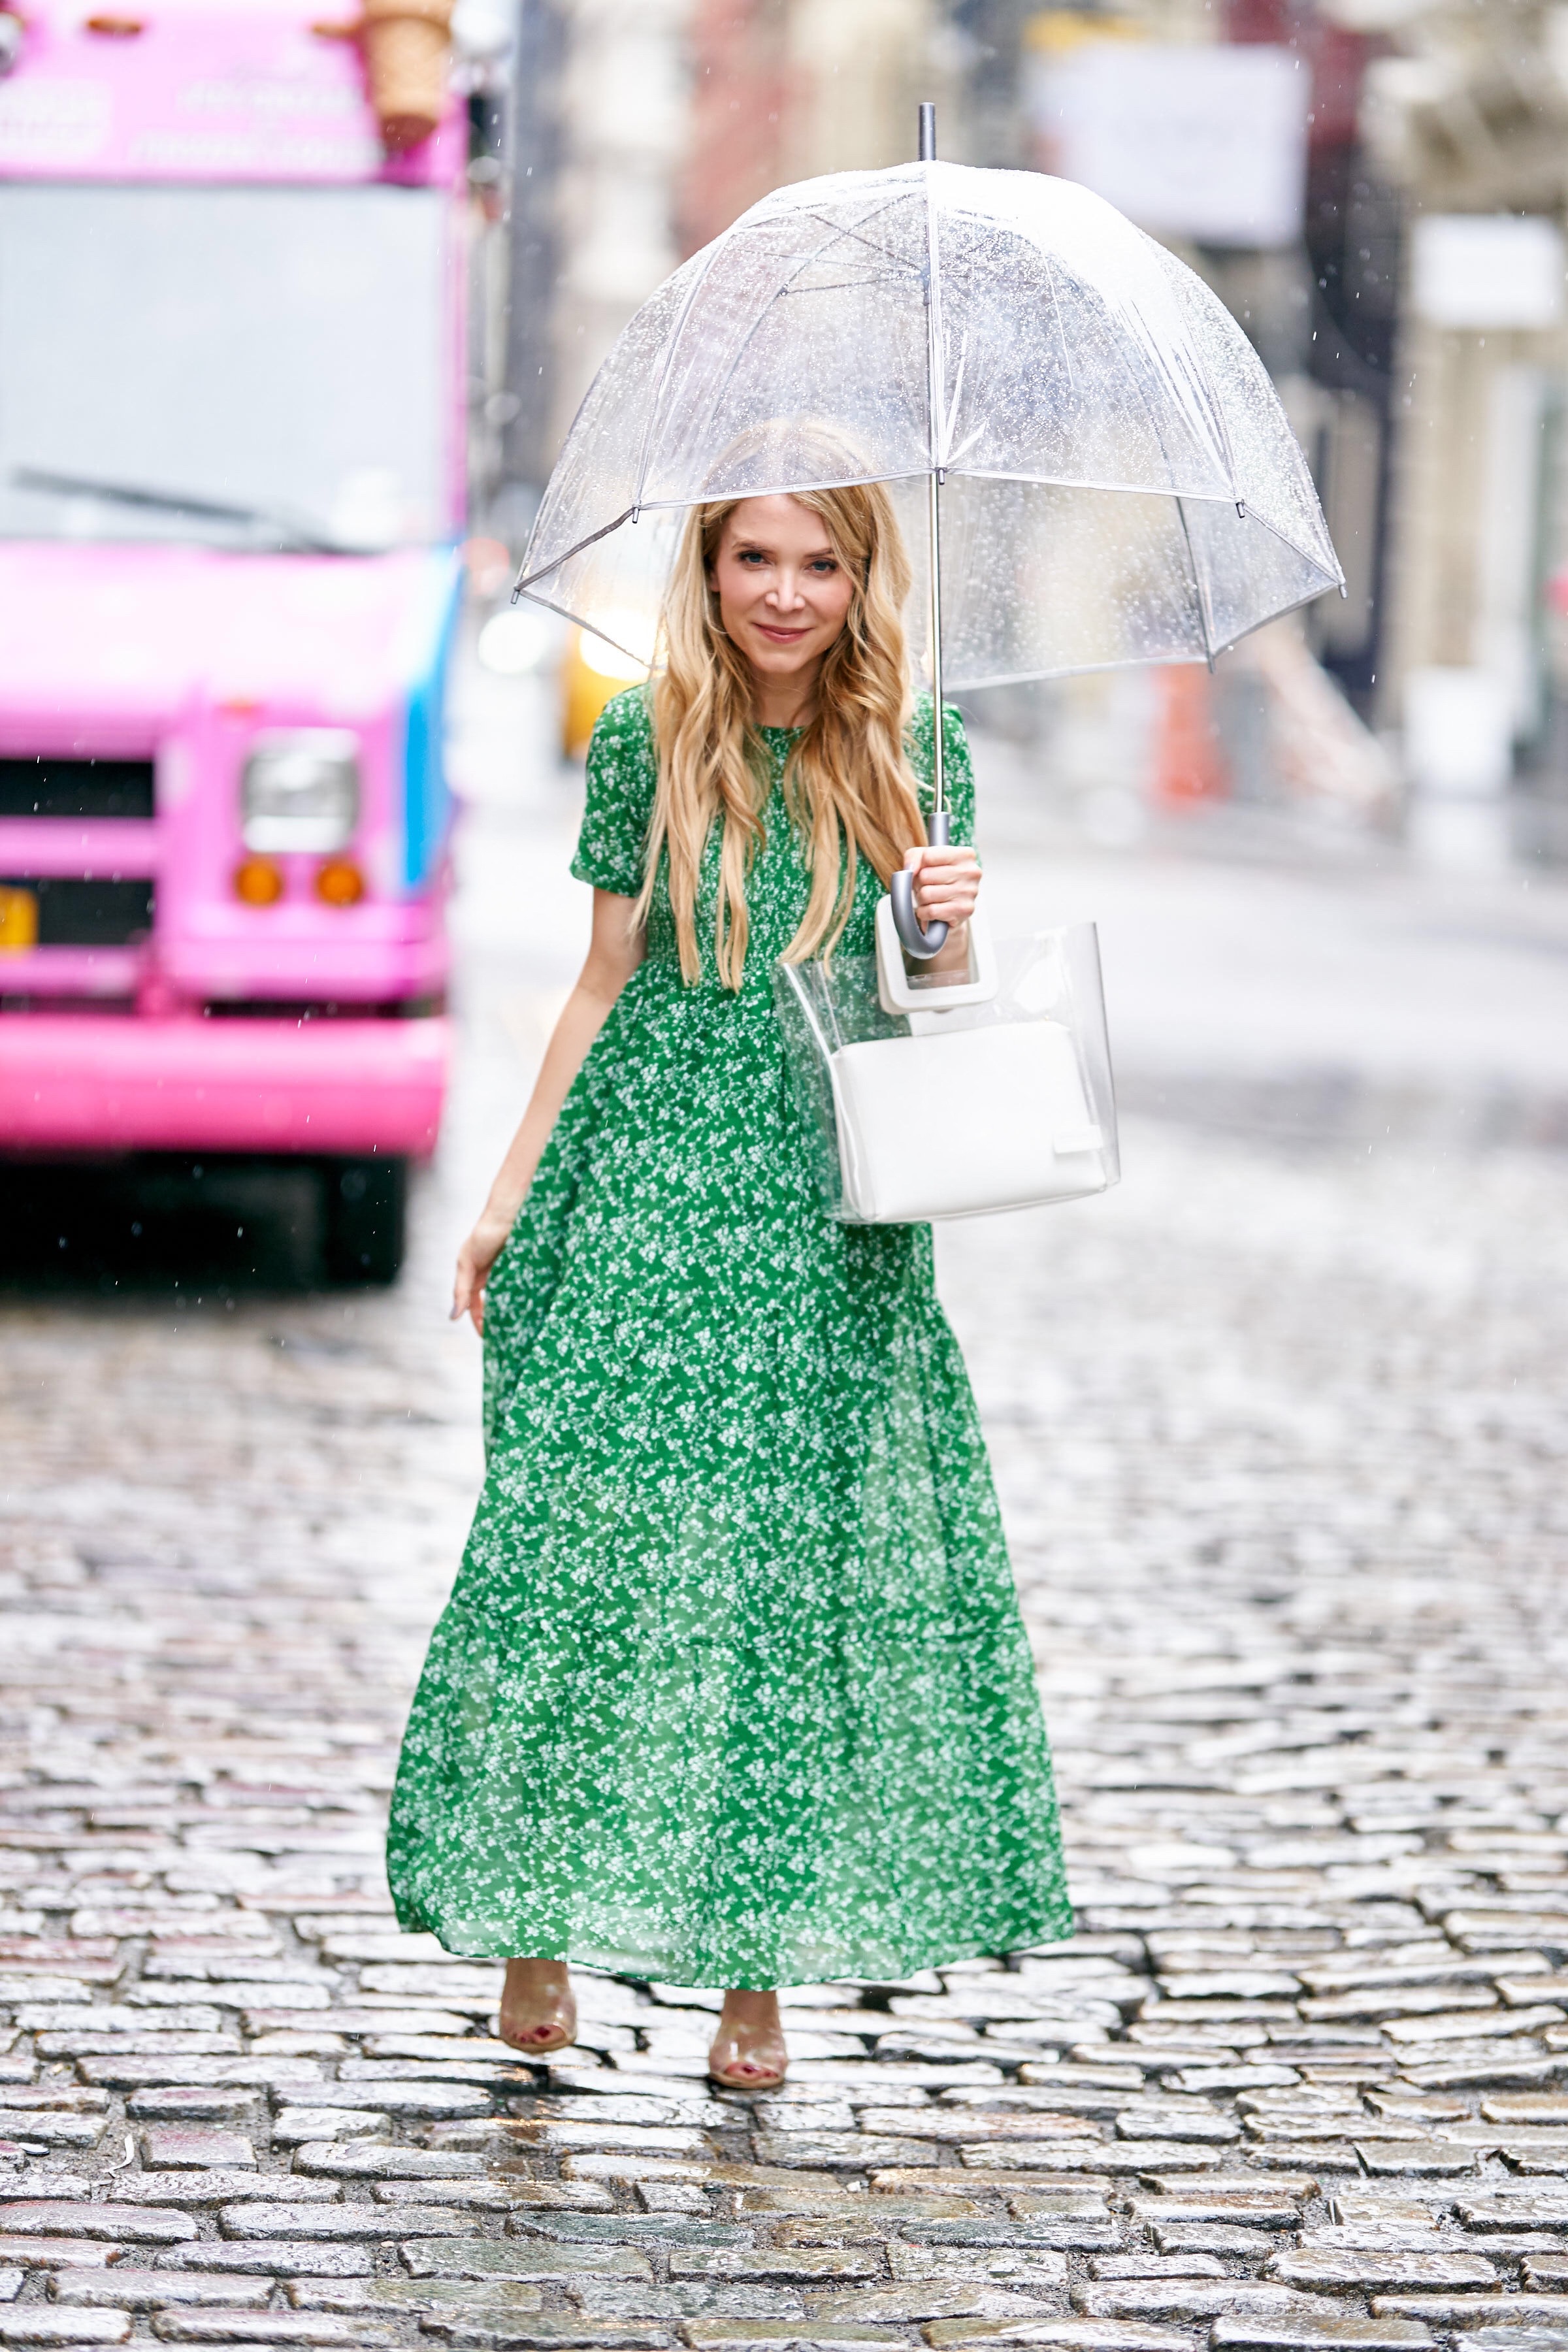 Green Maxi Dress, Zara maxi dress, Street Style, NYC street style, About the Outfits, Laura Bonner